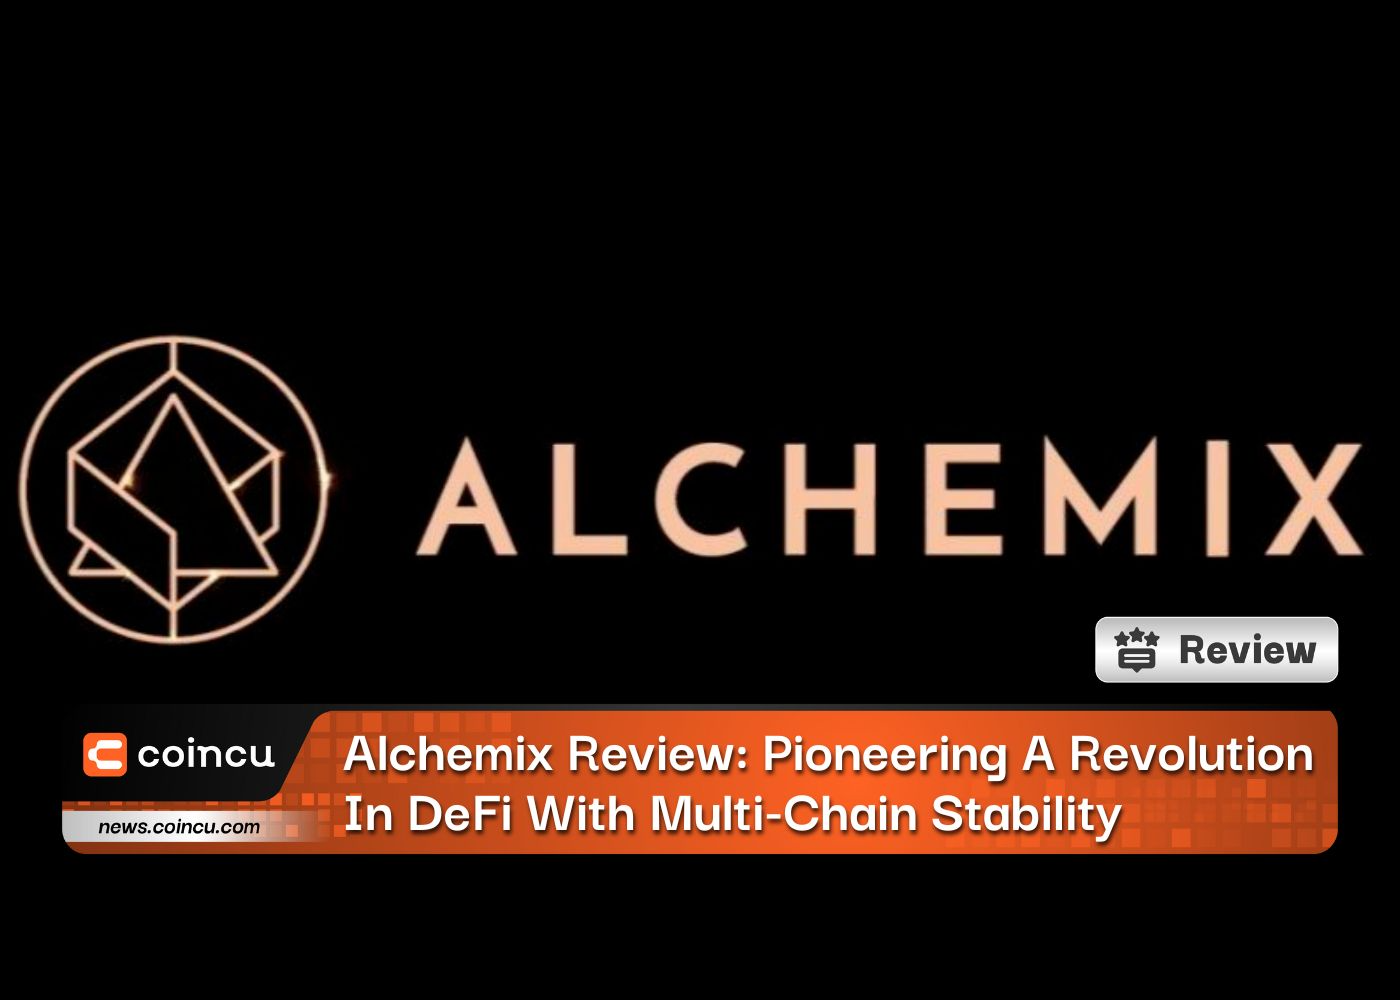 Alchemix Review: Pioneering A Revolution In DeFi With Multi-Chain Stability